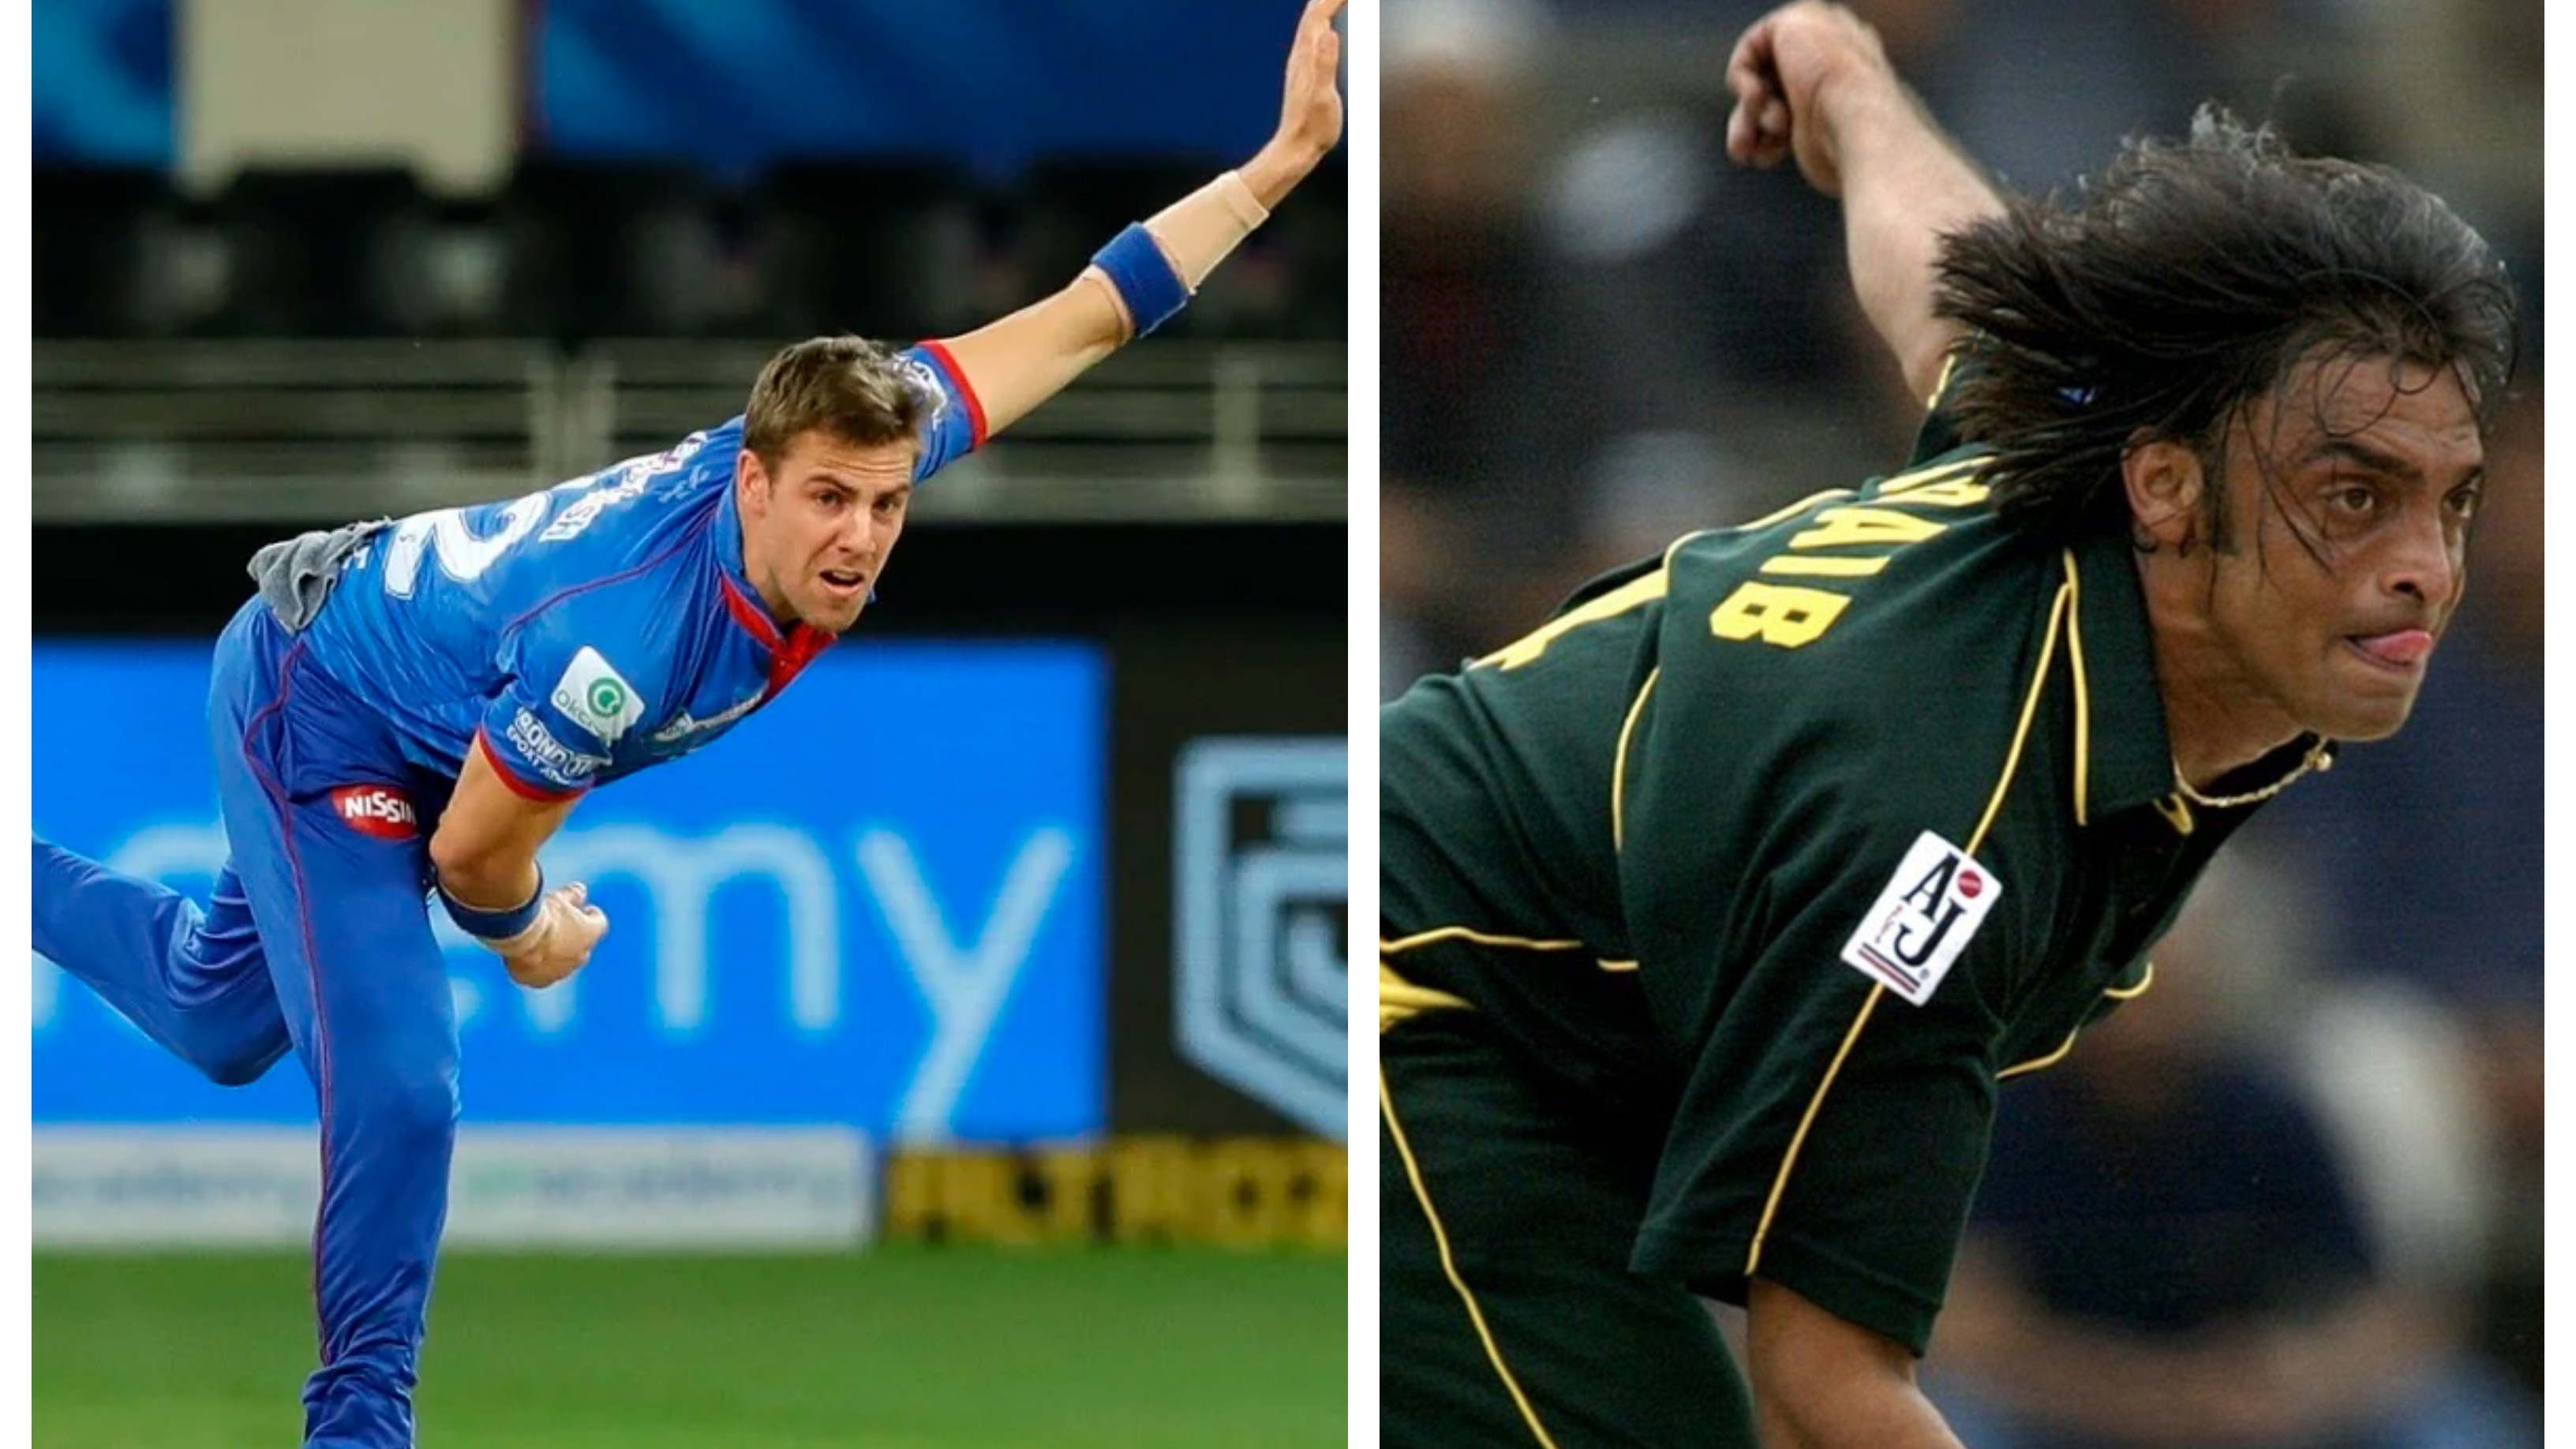 IPL 2020: Anrich Nortje looks to break Shoaib Akhtar’s record after delivering fastest ever IPL ball